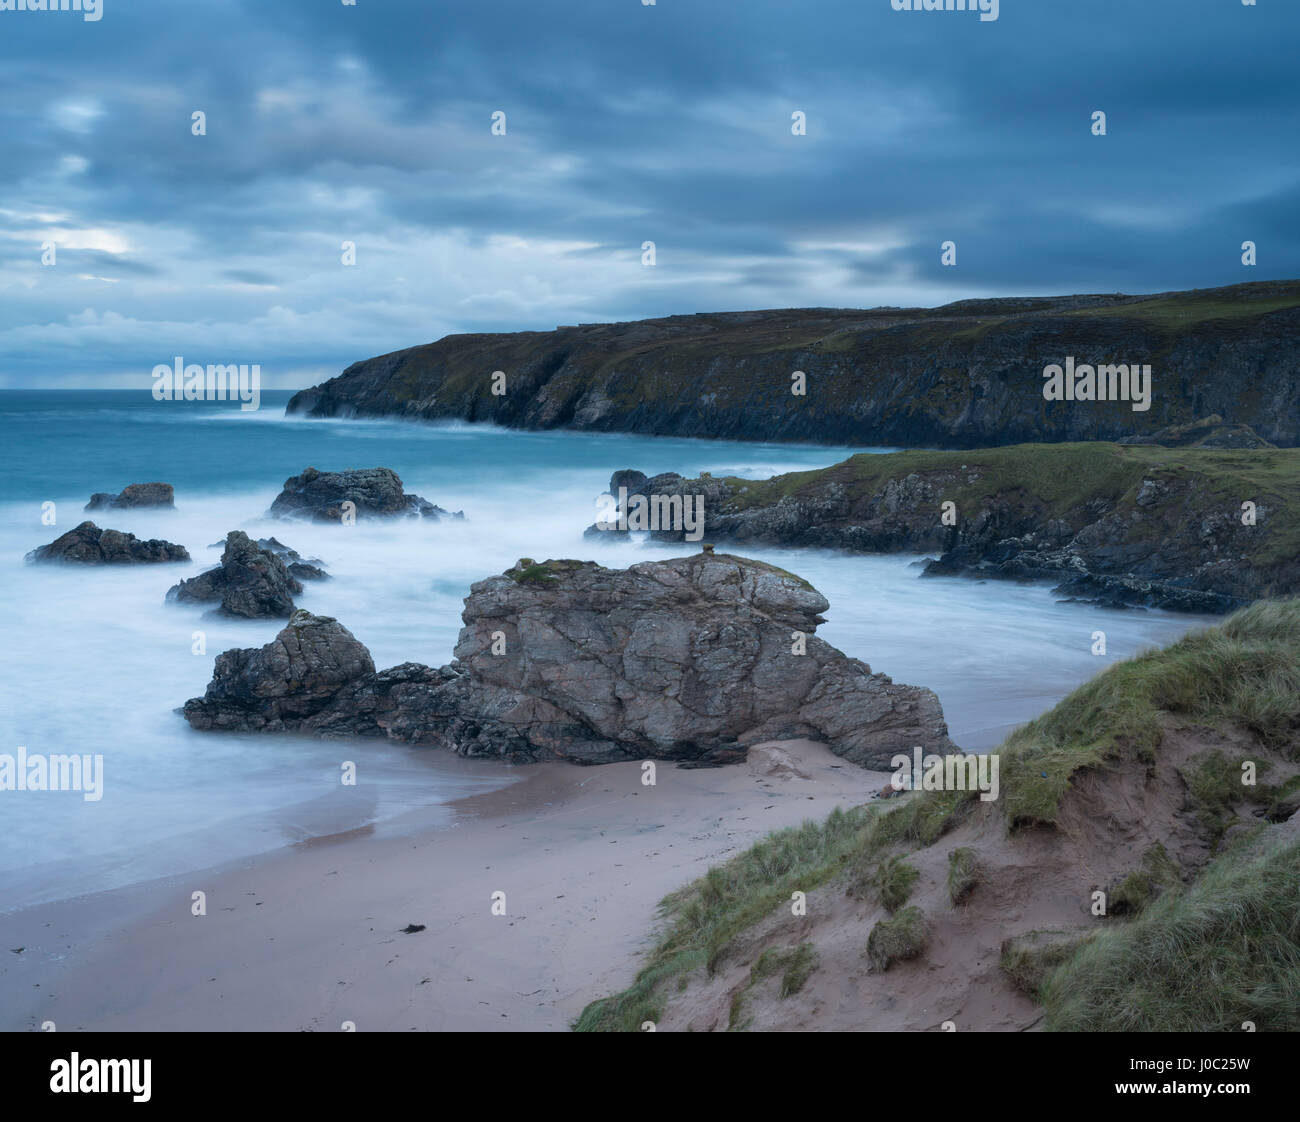 Dramatic weather viewed from the cliffs overlooking Sango Bay, Durness, Sutherland, Highlands, Scotland, UK Stock Photo